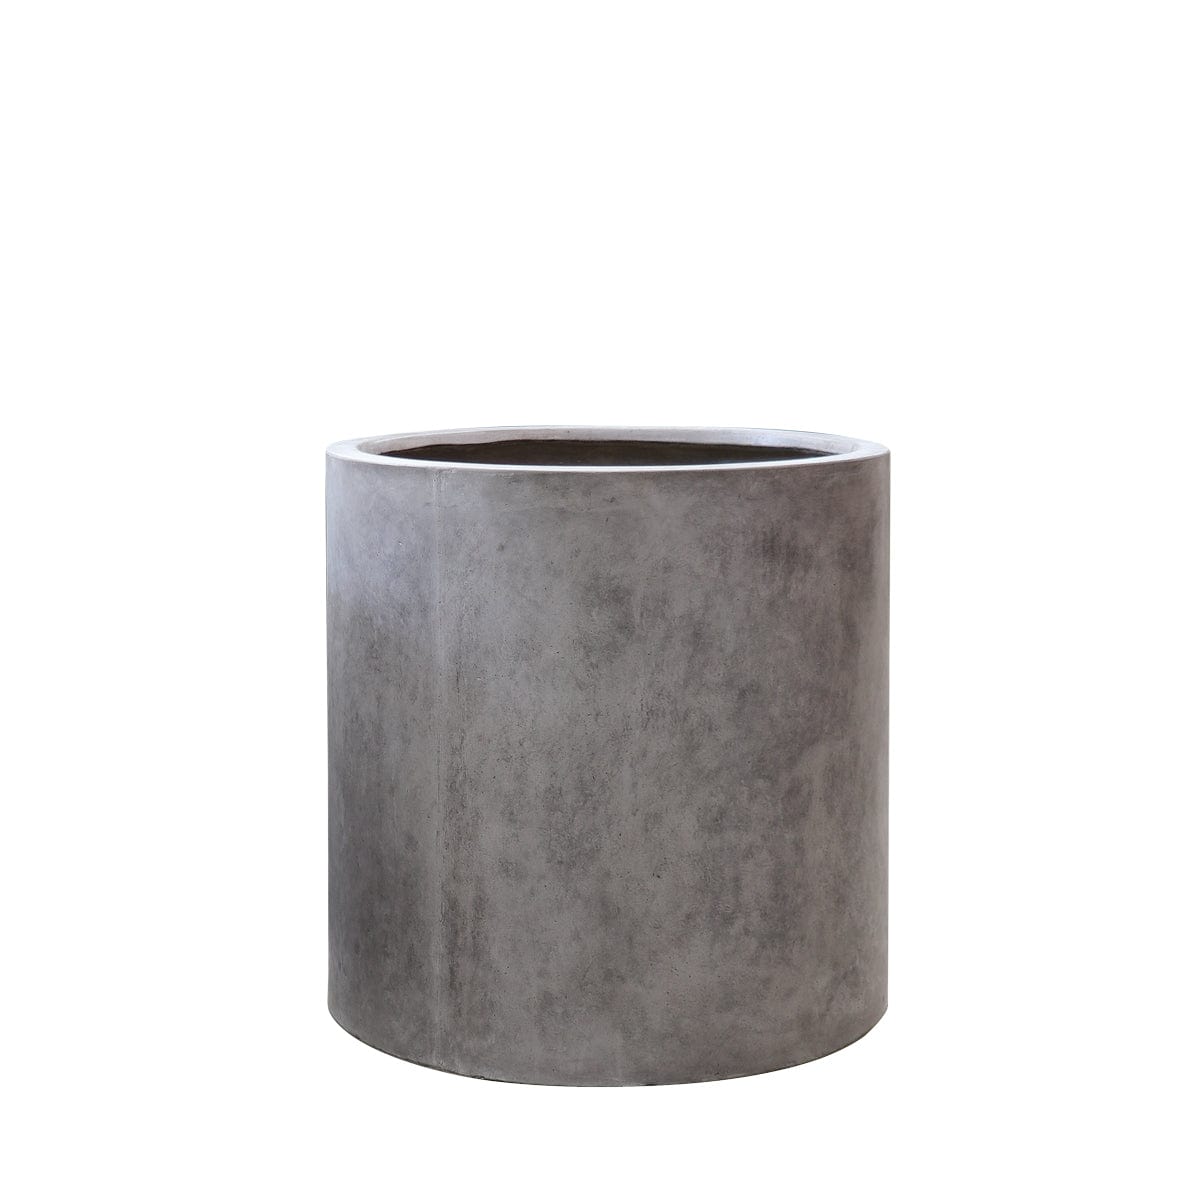 Mikonui Cylinder Planter Small - Weathered Cement PRE ORDER Little & Fox